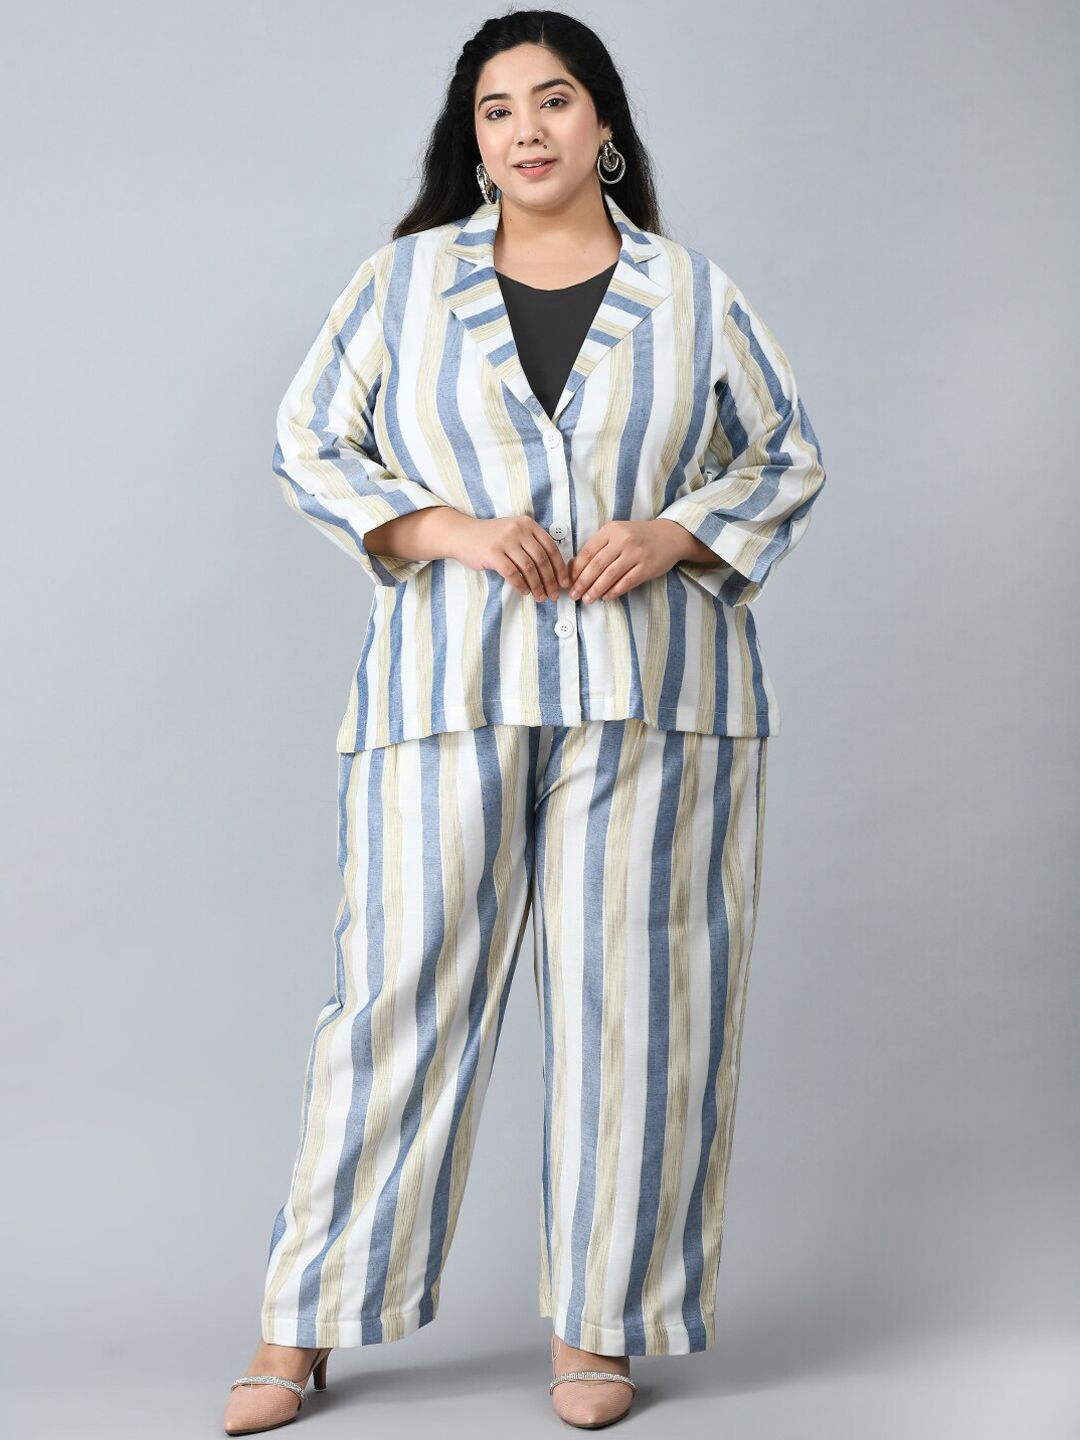 Buy Prettyplus By Desinoor.Com PrettyPlus by Desinoor.com Women Plus Size  Striped Shirt with Trouser Co-ord Set at Redfynd